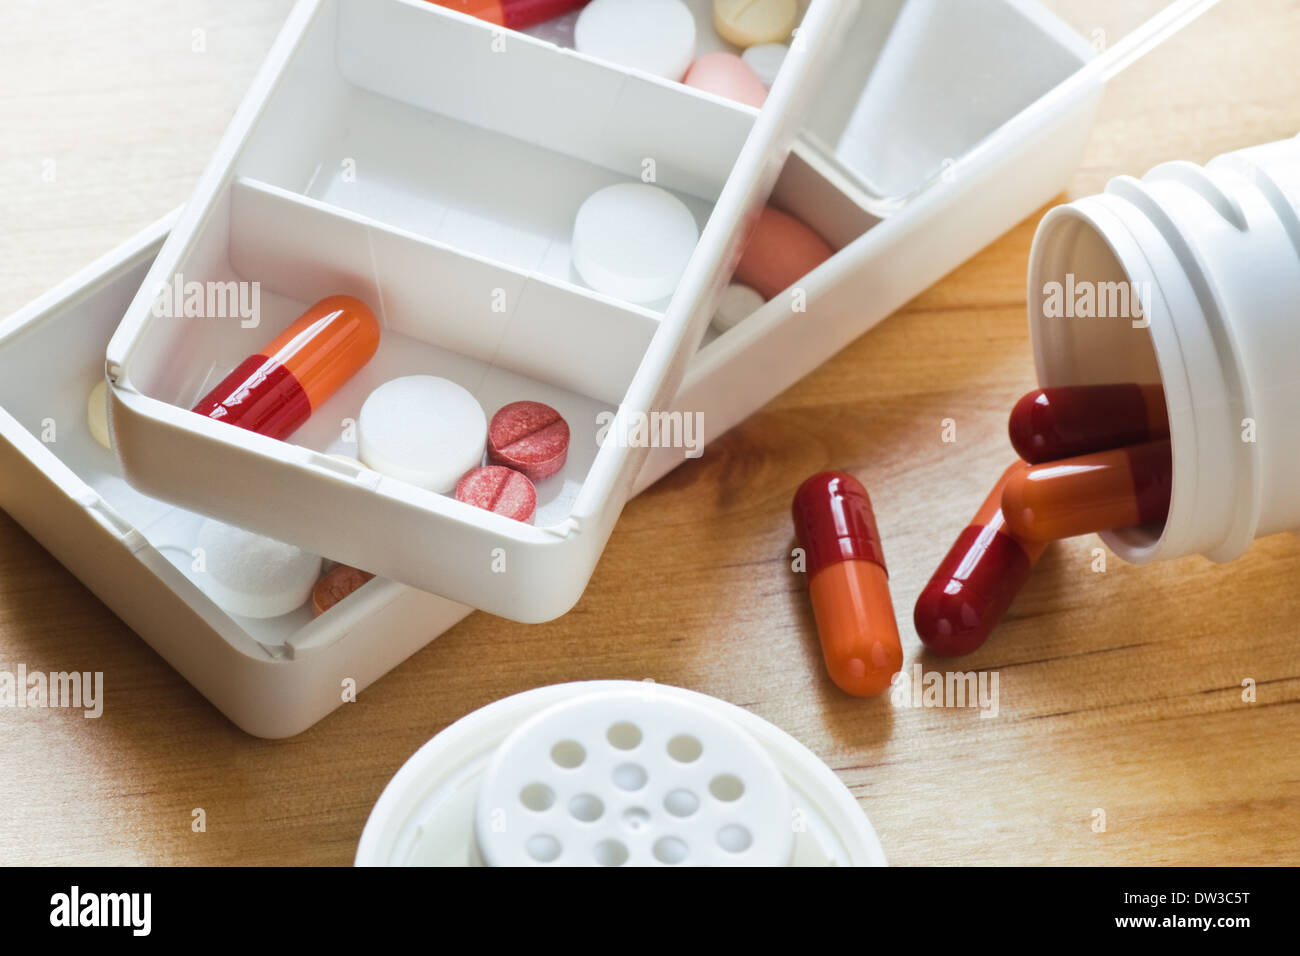 Healthcare - Daily medication - pills, tablets and capsules sorted out in pillboxes for use as daily medication Stock Photo